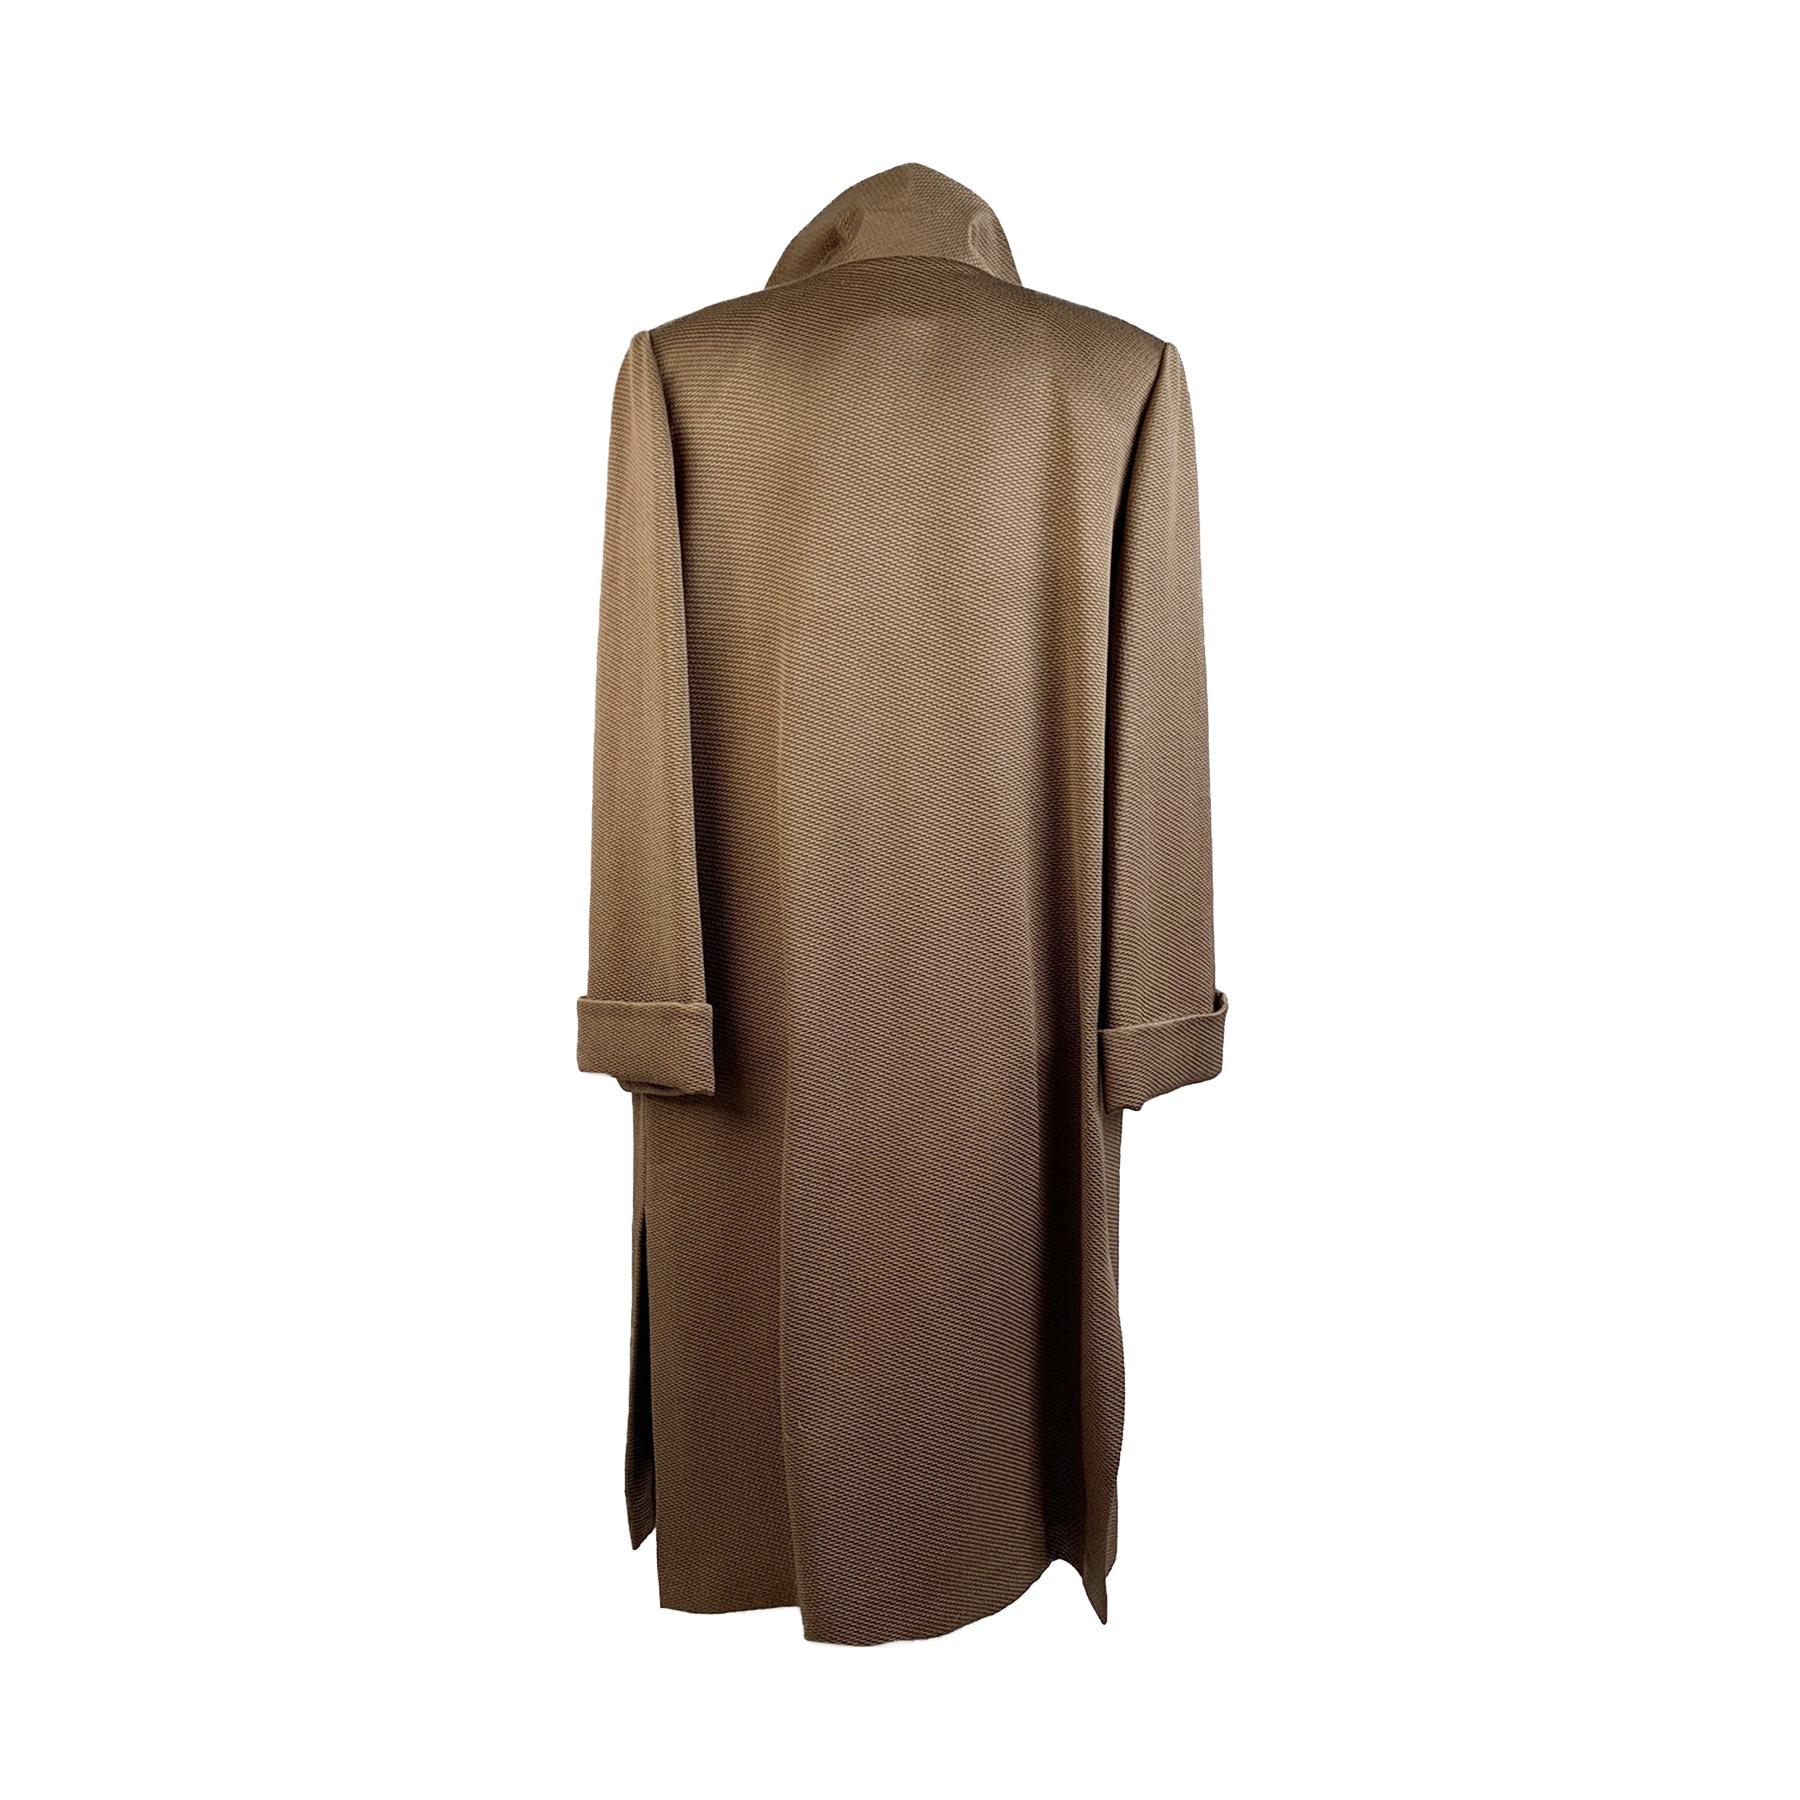 Galitzine Couture vintage light brown dustcoat coat. It features an open front, collared neckline, long sleeve styling with rolled cuffs and 2 rear slits. 2 pockets on the hips. Composition tag is missing, it seems to be wool blend fabric. Unlined.